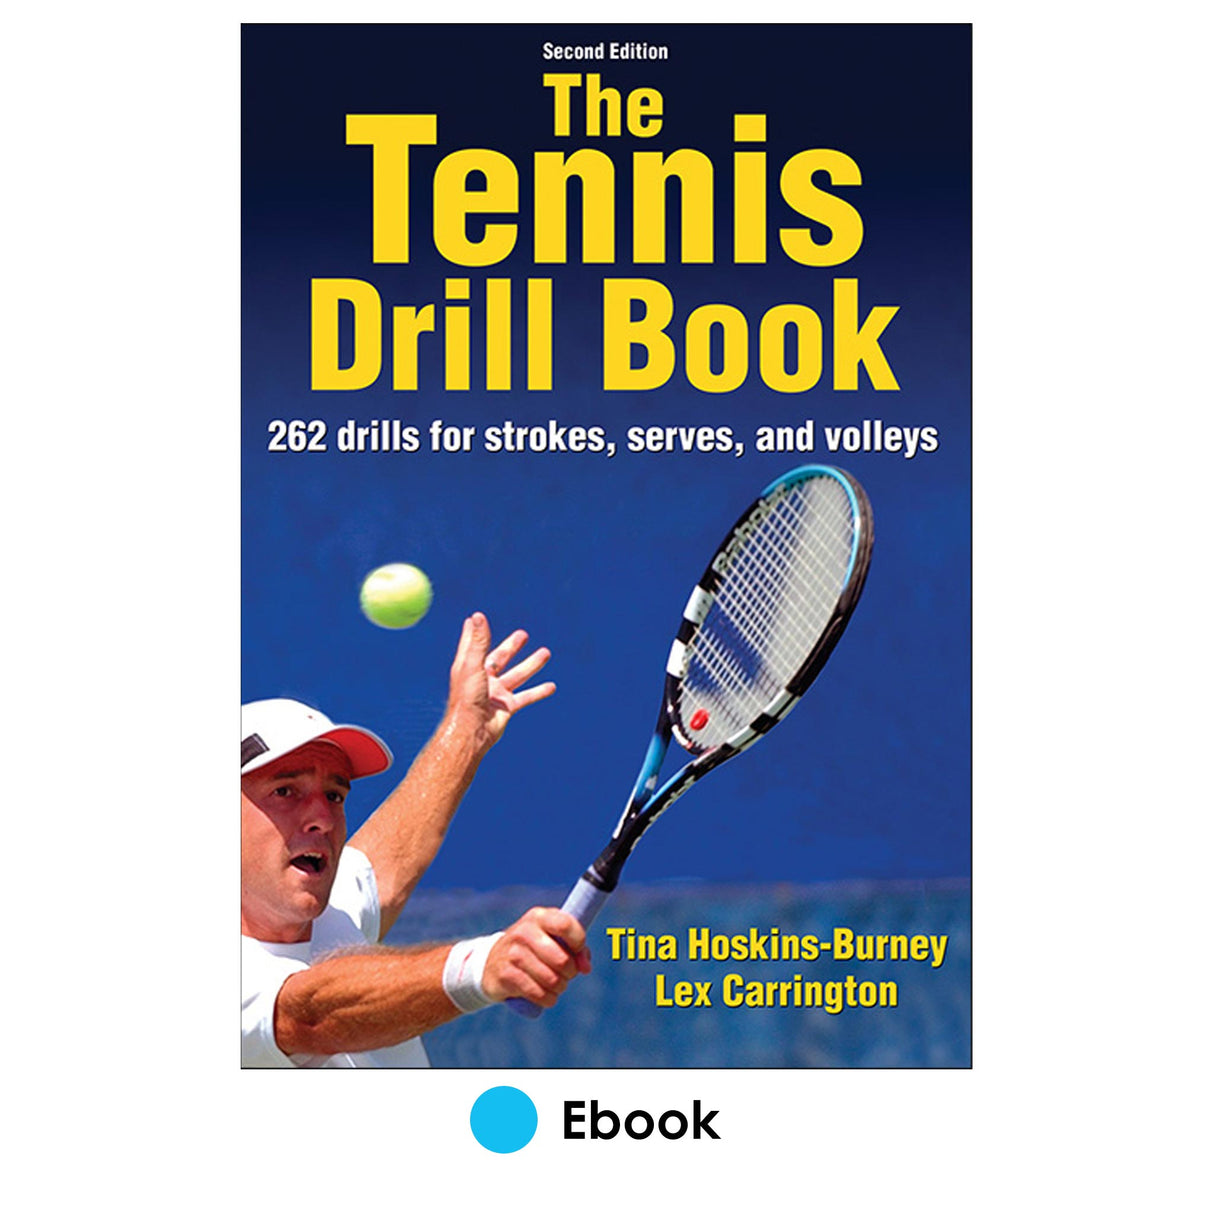 Tennis Drill Book 2nd Edition PDF, The